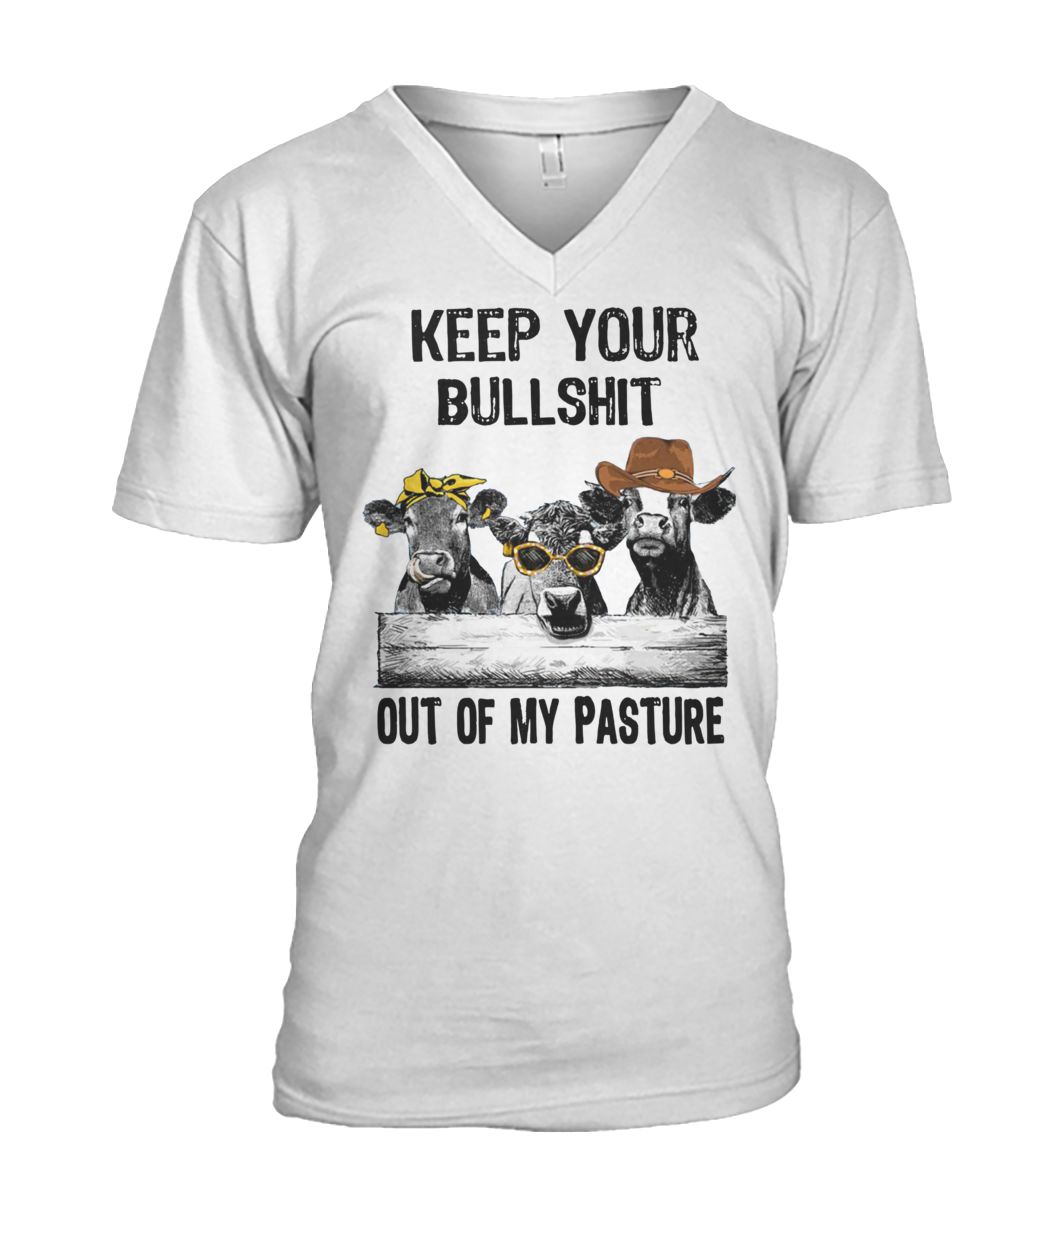 Cows keep your bullshit out of my pasture mens v-neck